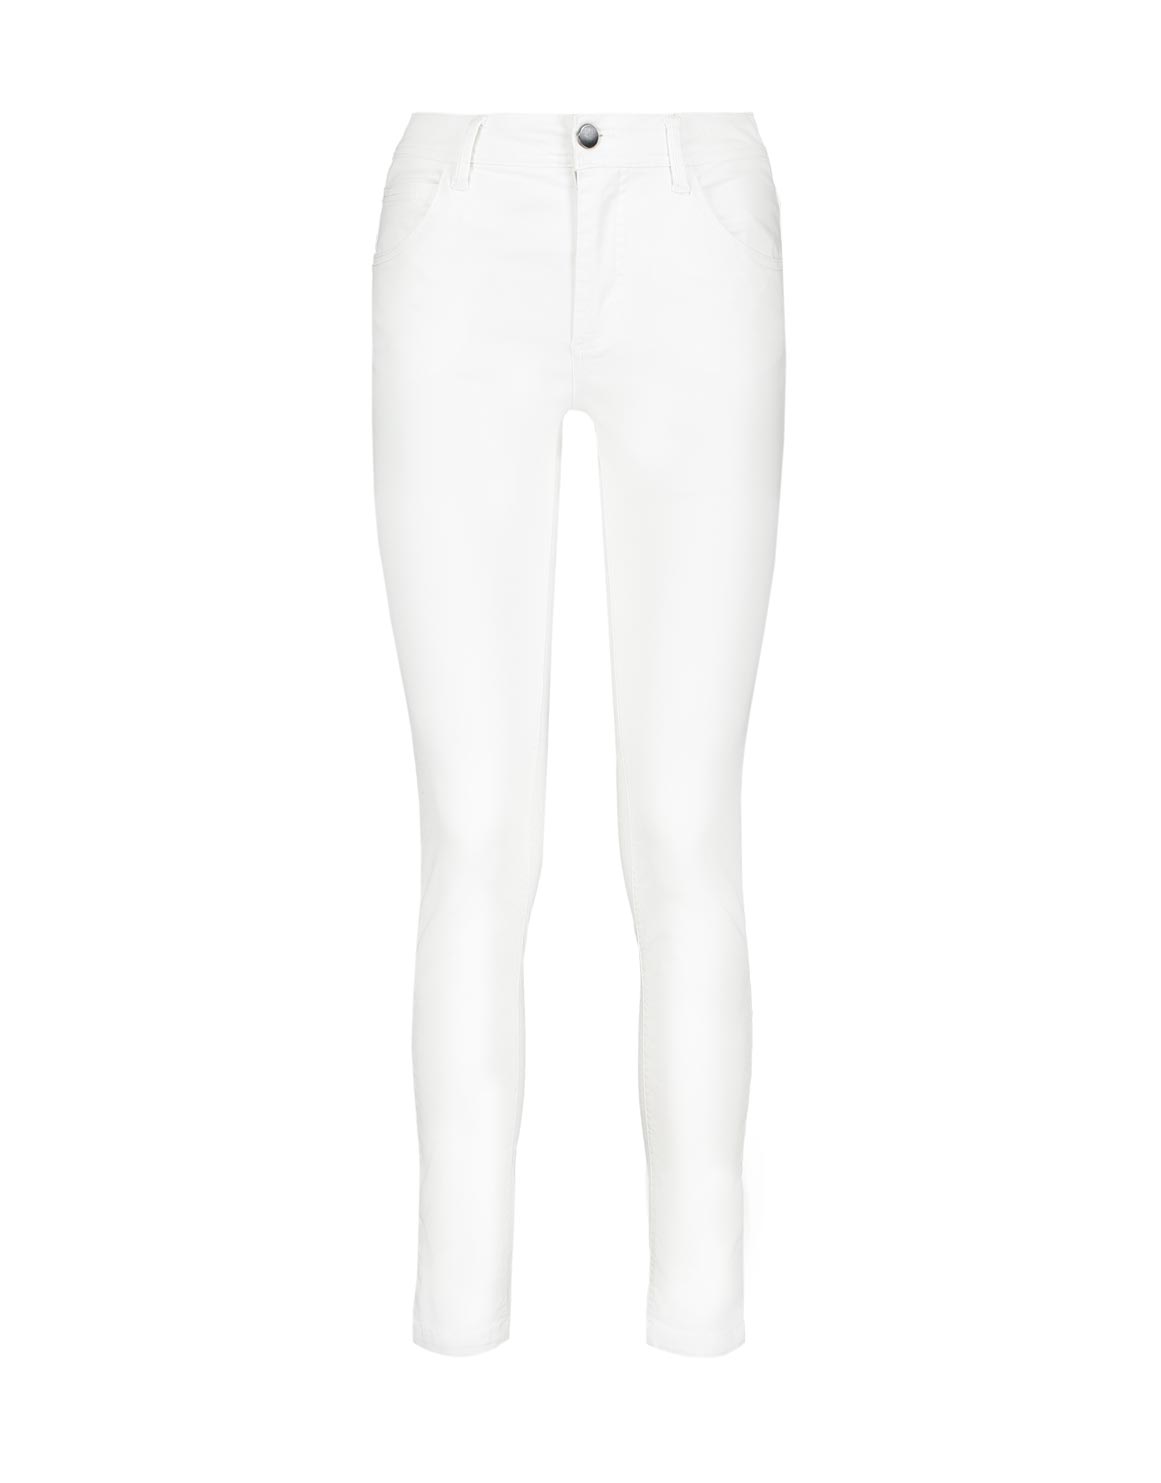 SS20 SKINNY - Woolworths Mauritius Online